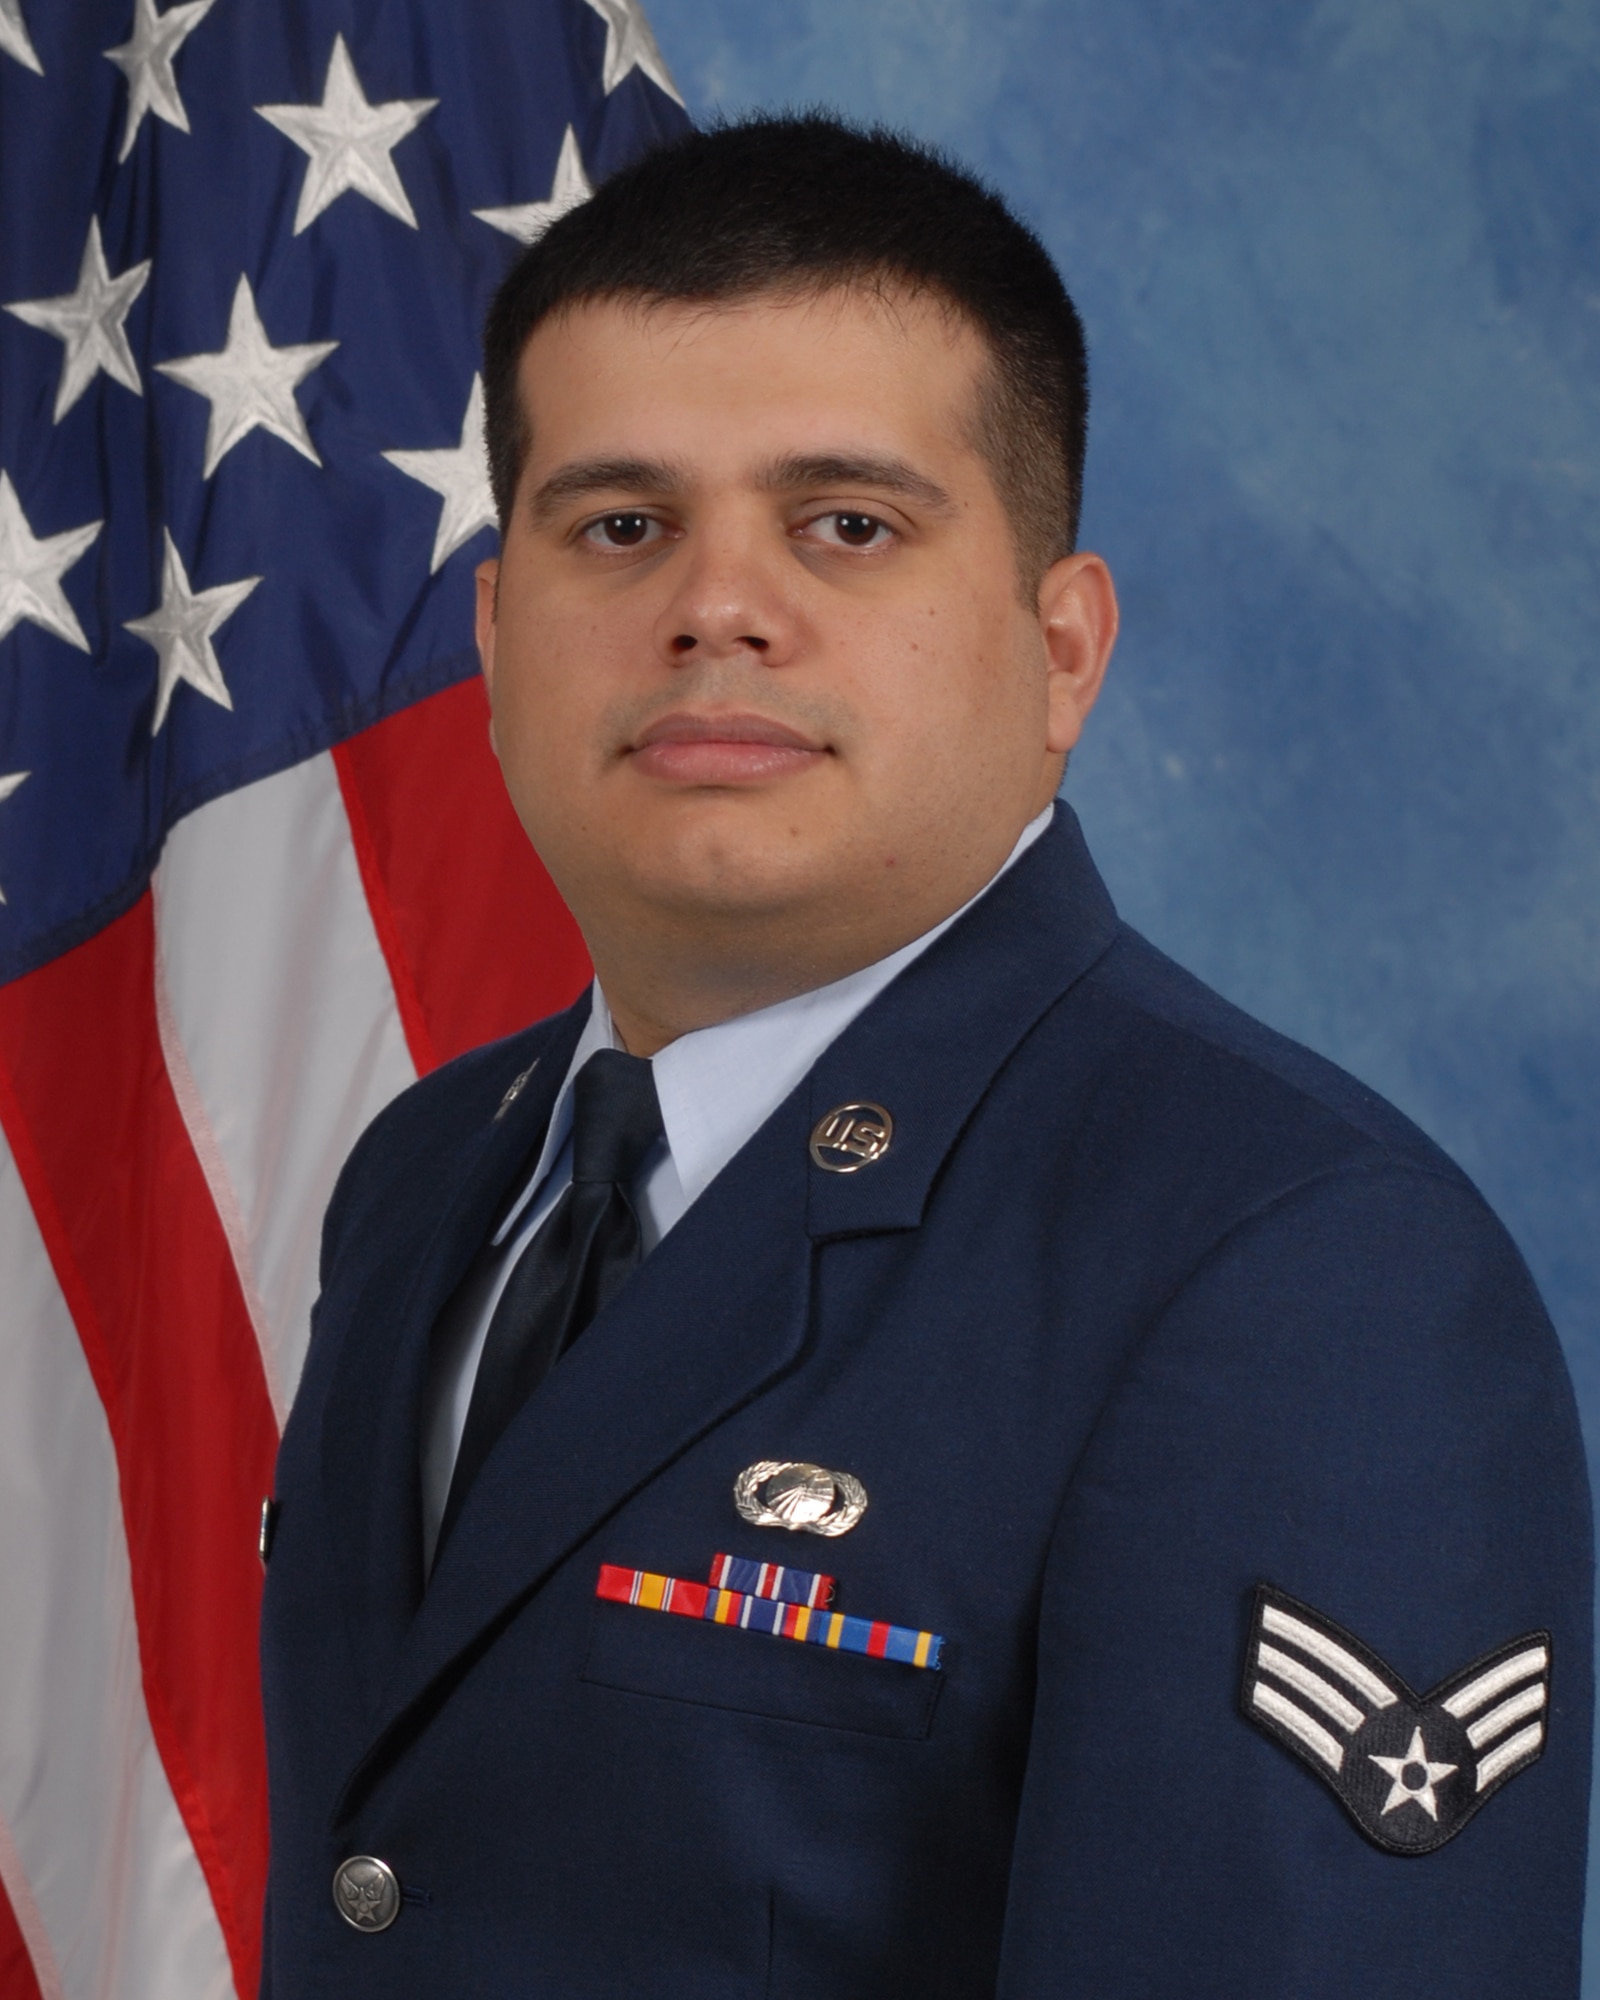 Senior Airman Francisco Manitas, 17th Comptroller Squadron is the 2009 Airman of the Year for the 17th Training Wing, Goodfellow AFB, Texas. The annual awards program recognizes both civilians and members in 16 categories of the Air Force, Army, Navy and Marines who are assigned to the wing, for their significant contributions to the 17 TRW, the community and mission. (U.S. Air Force photo/ Lou Czarnecki)